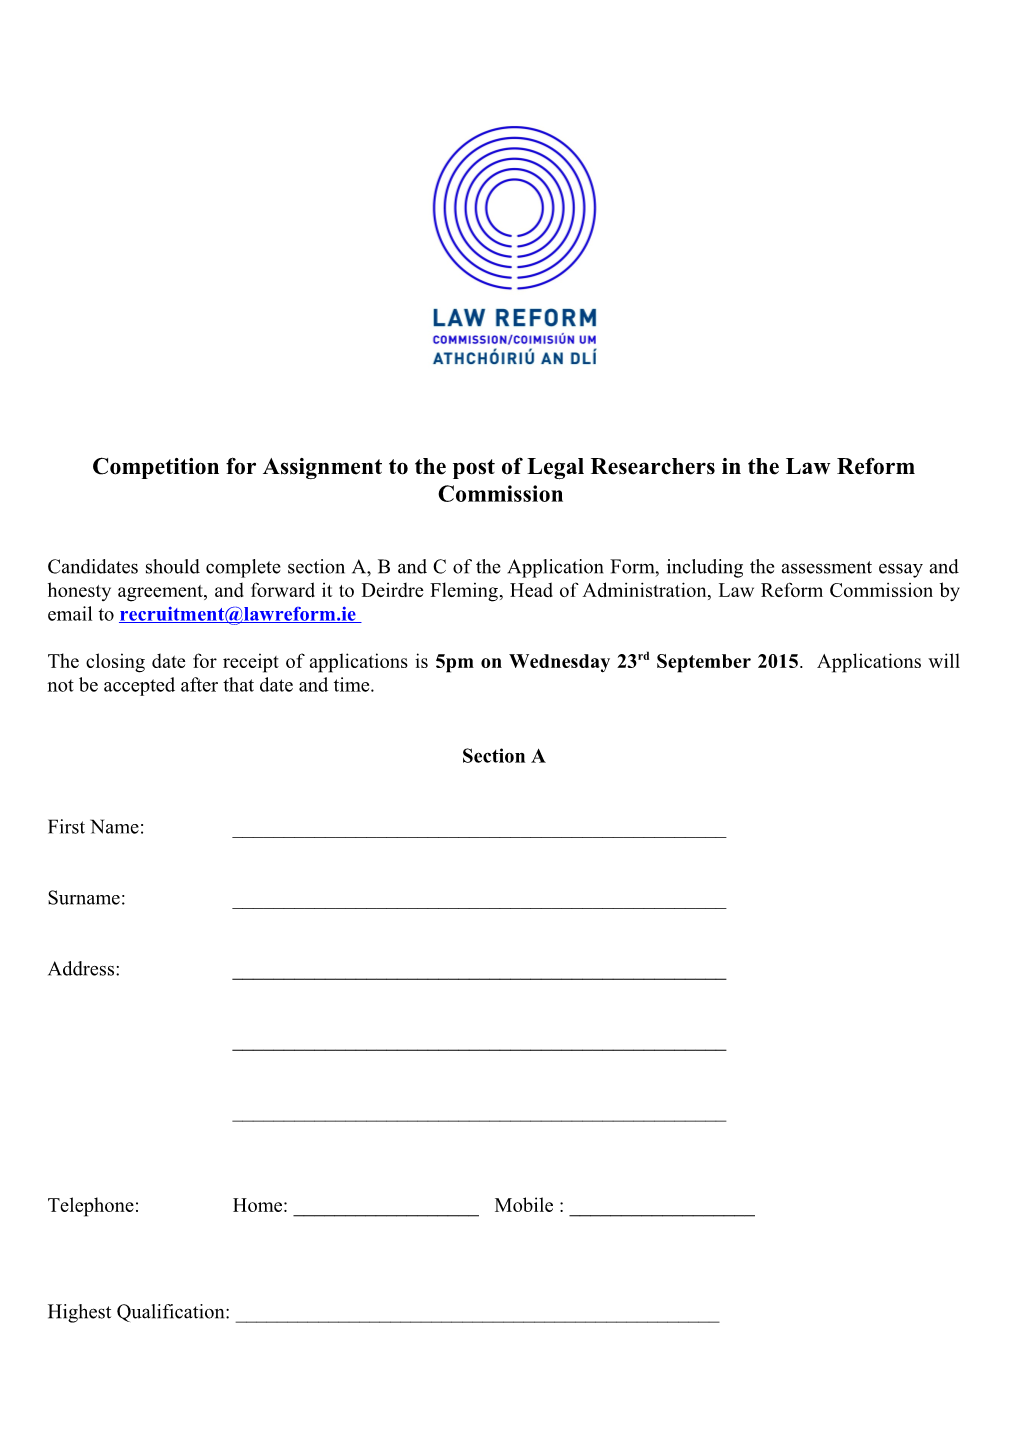 Competition for Assignment to the Post of Legal Researchers in the Law Reform Commission